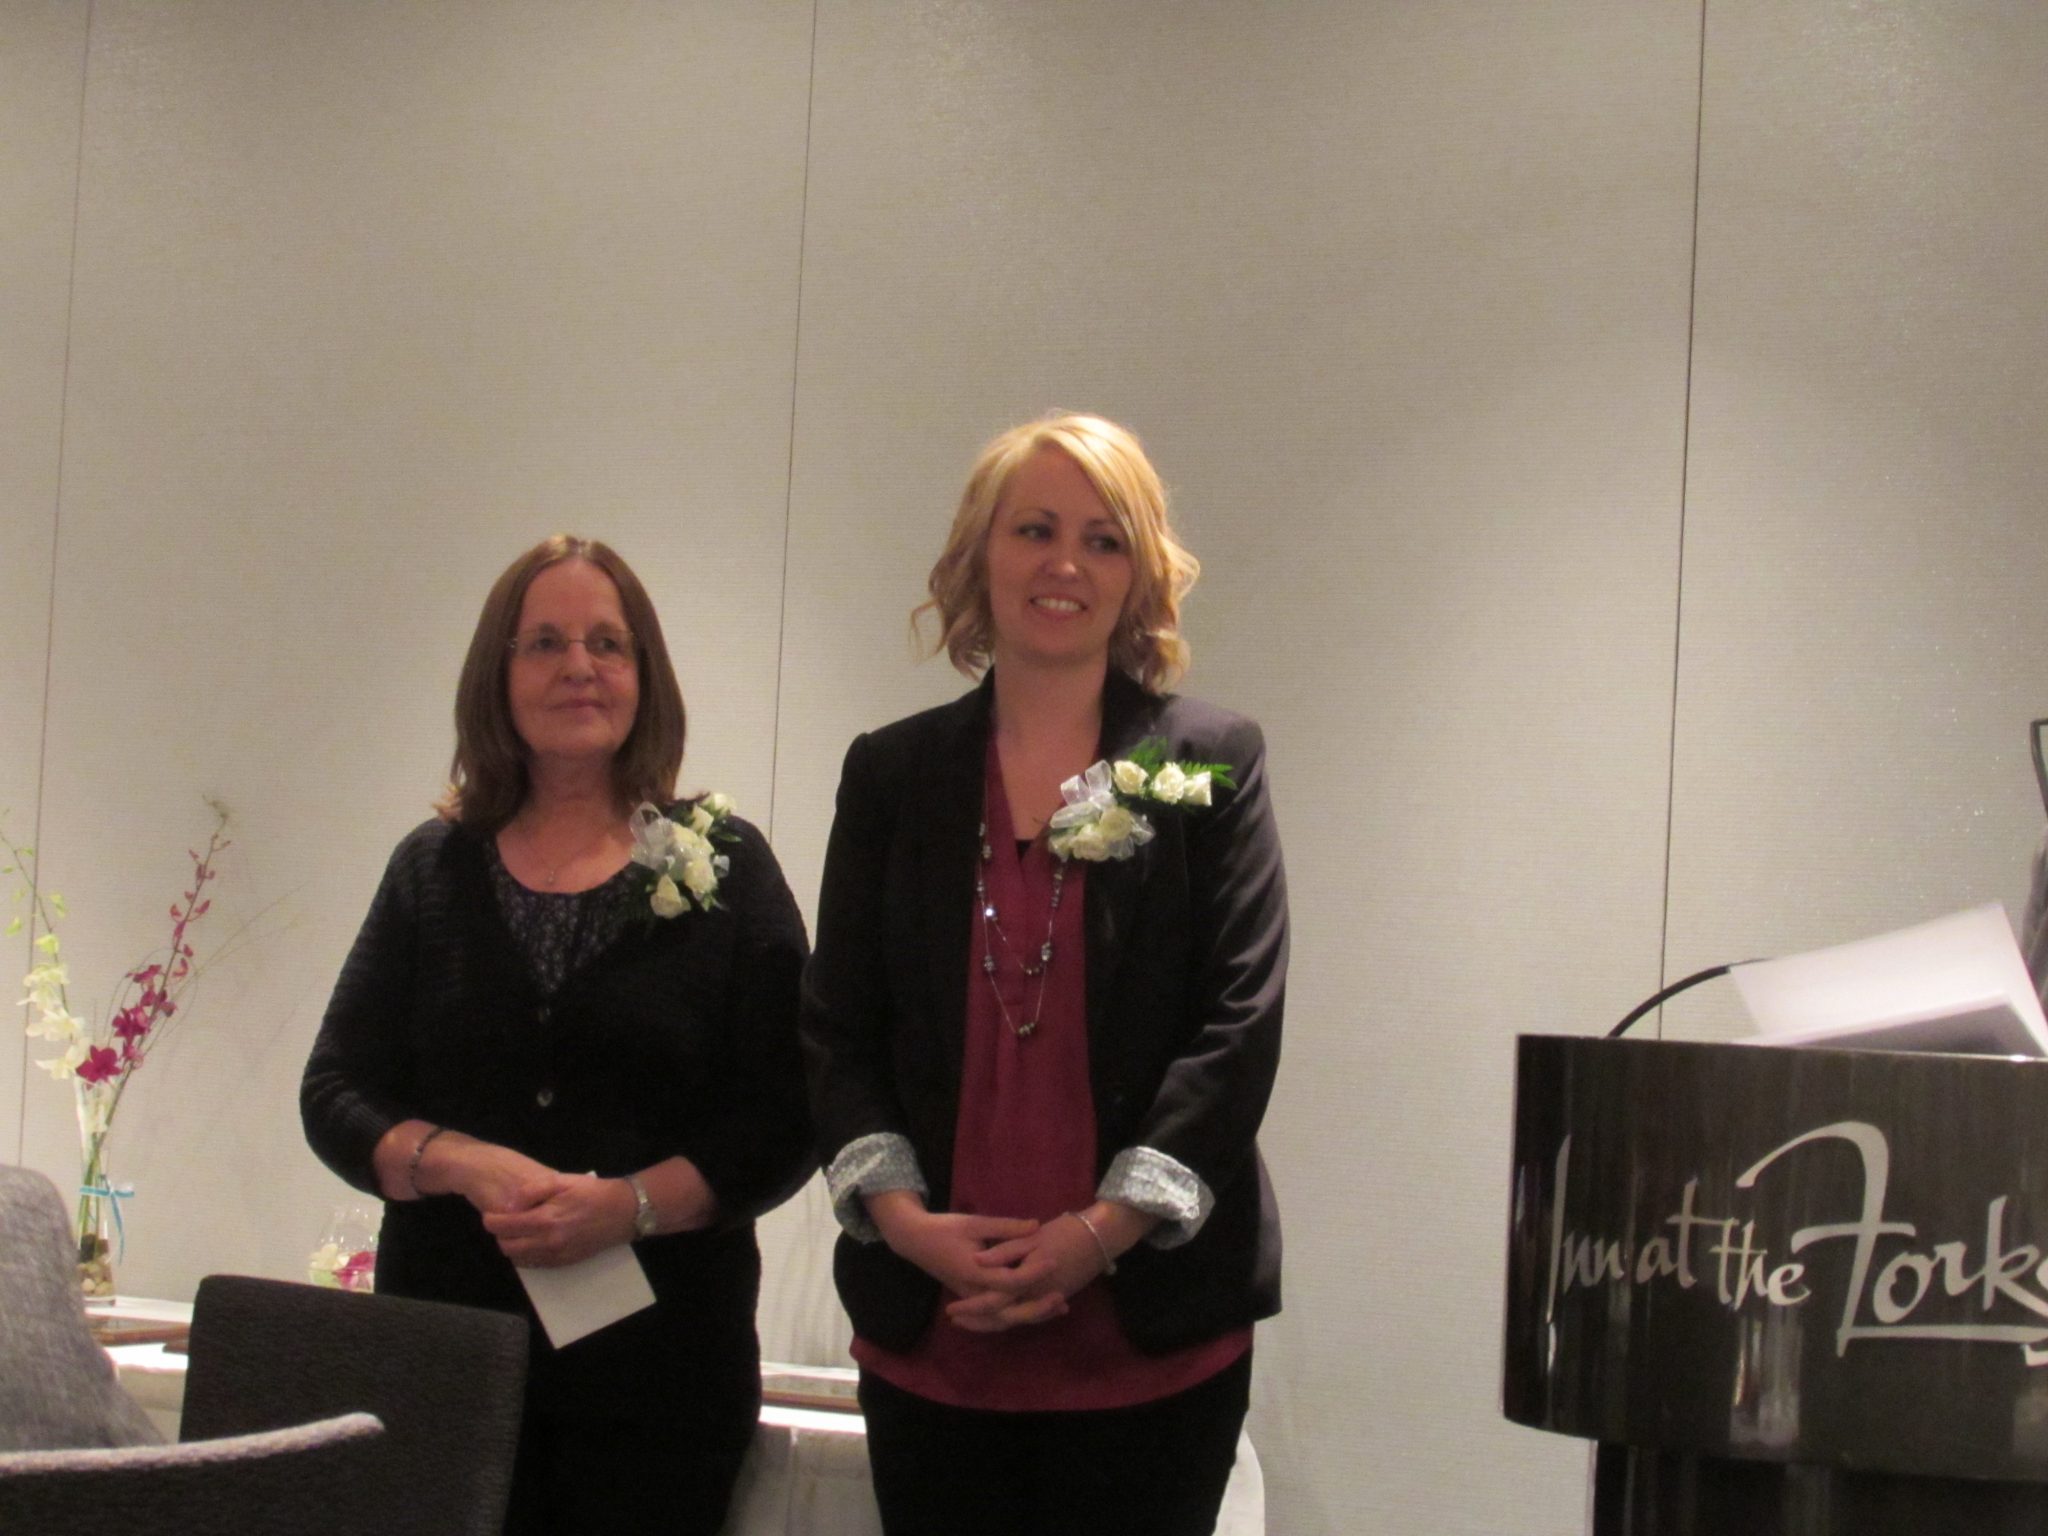 Jacqueline Pentney (R) and Betty Wedgewood (L) receiving the joint Award for Excellence in Psychiatric Nursing Practice---Education. (Photo sent in by Serena Yaworski)